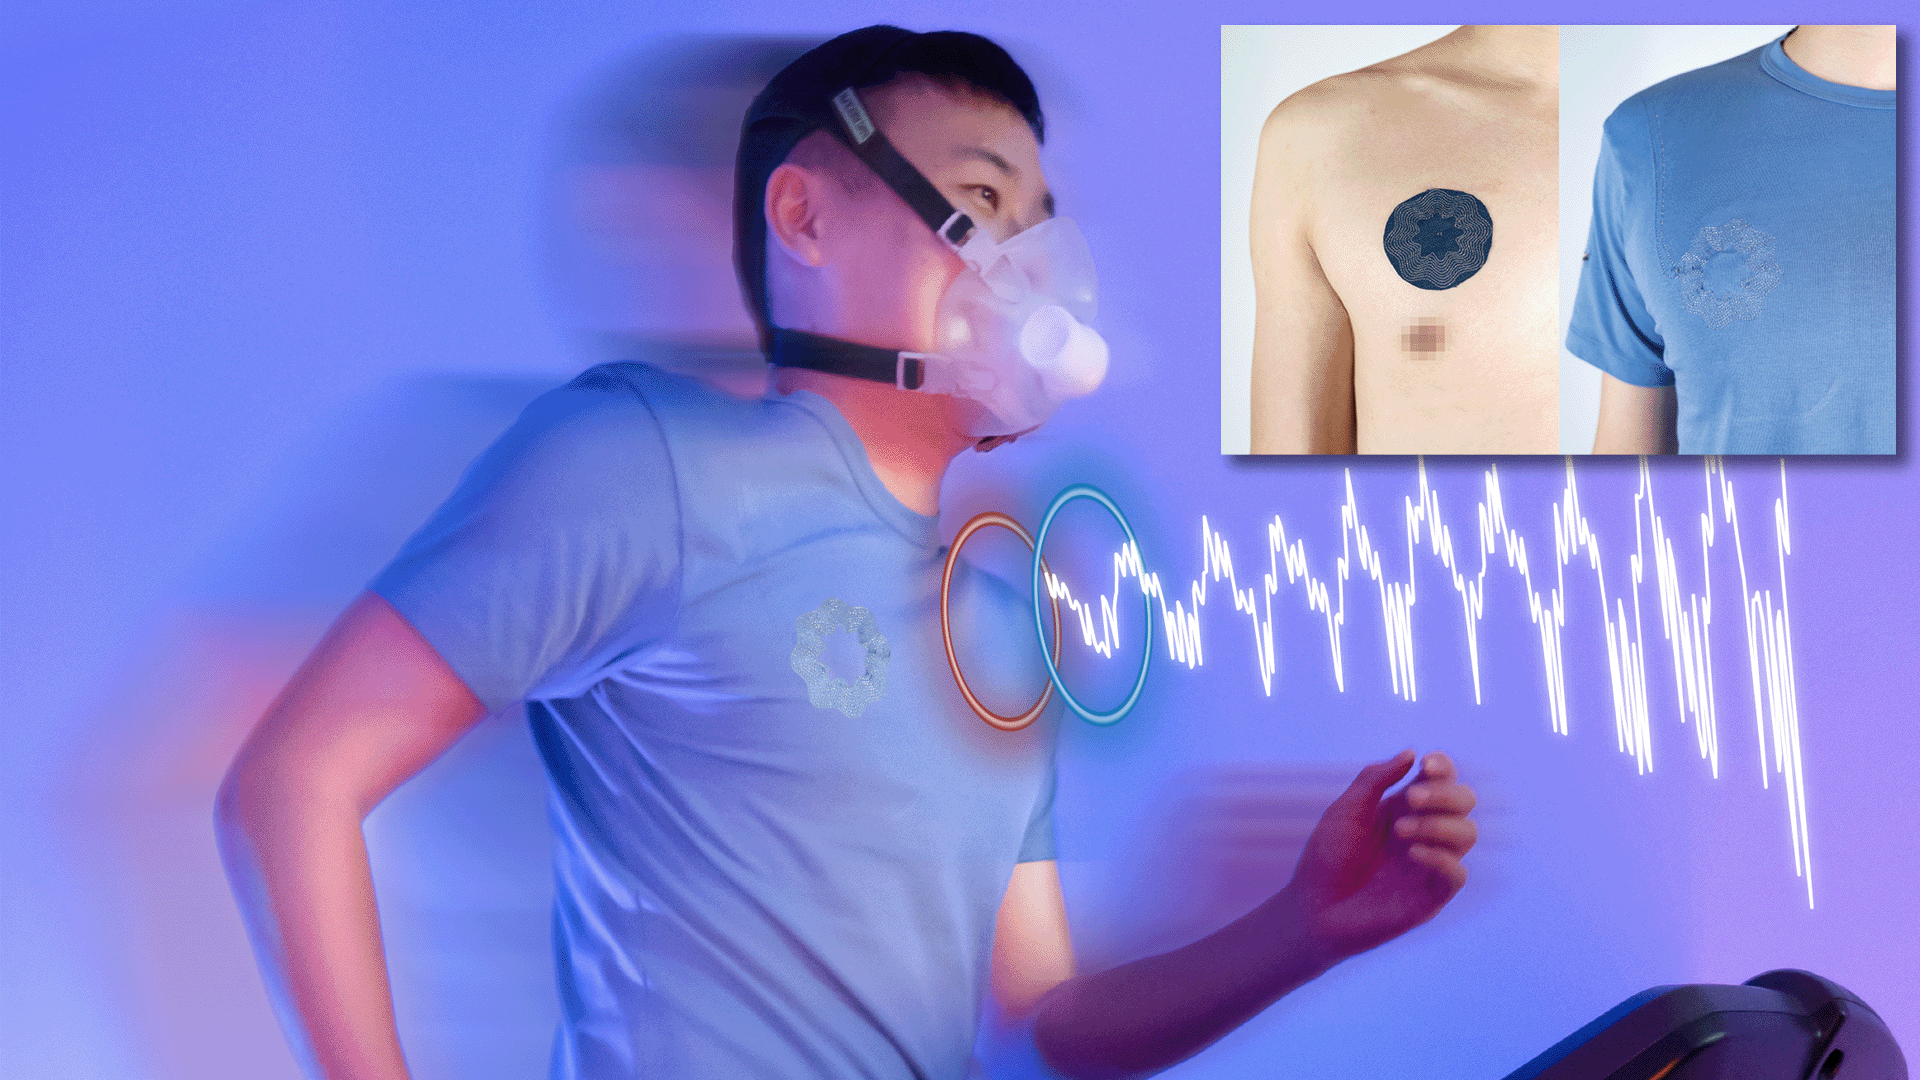 The researchers'  findings could be especially significant for the fast-growing field of wearable sensors.